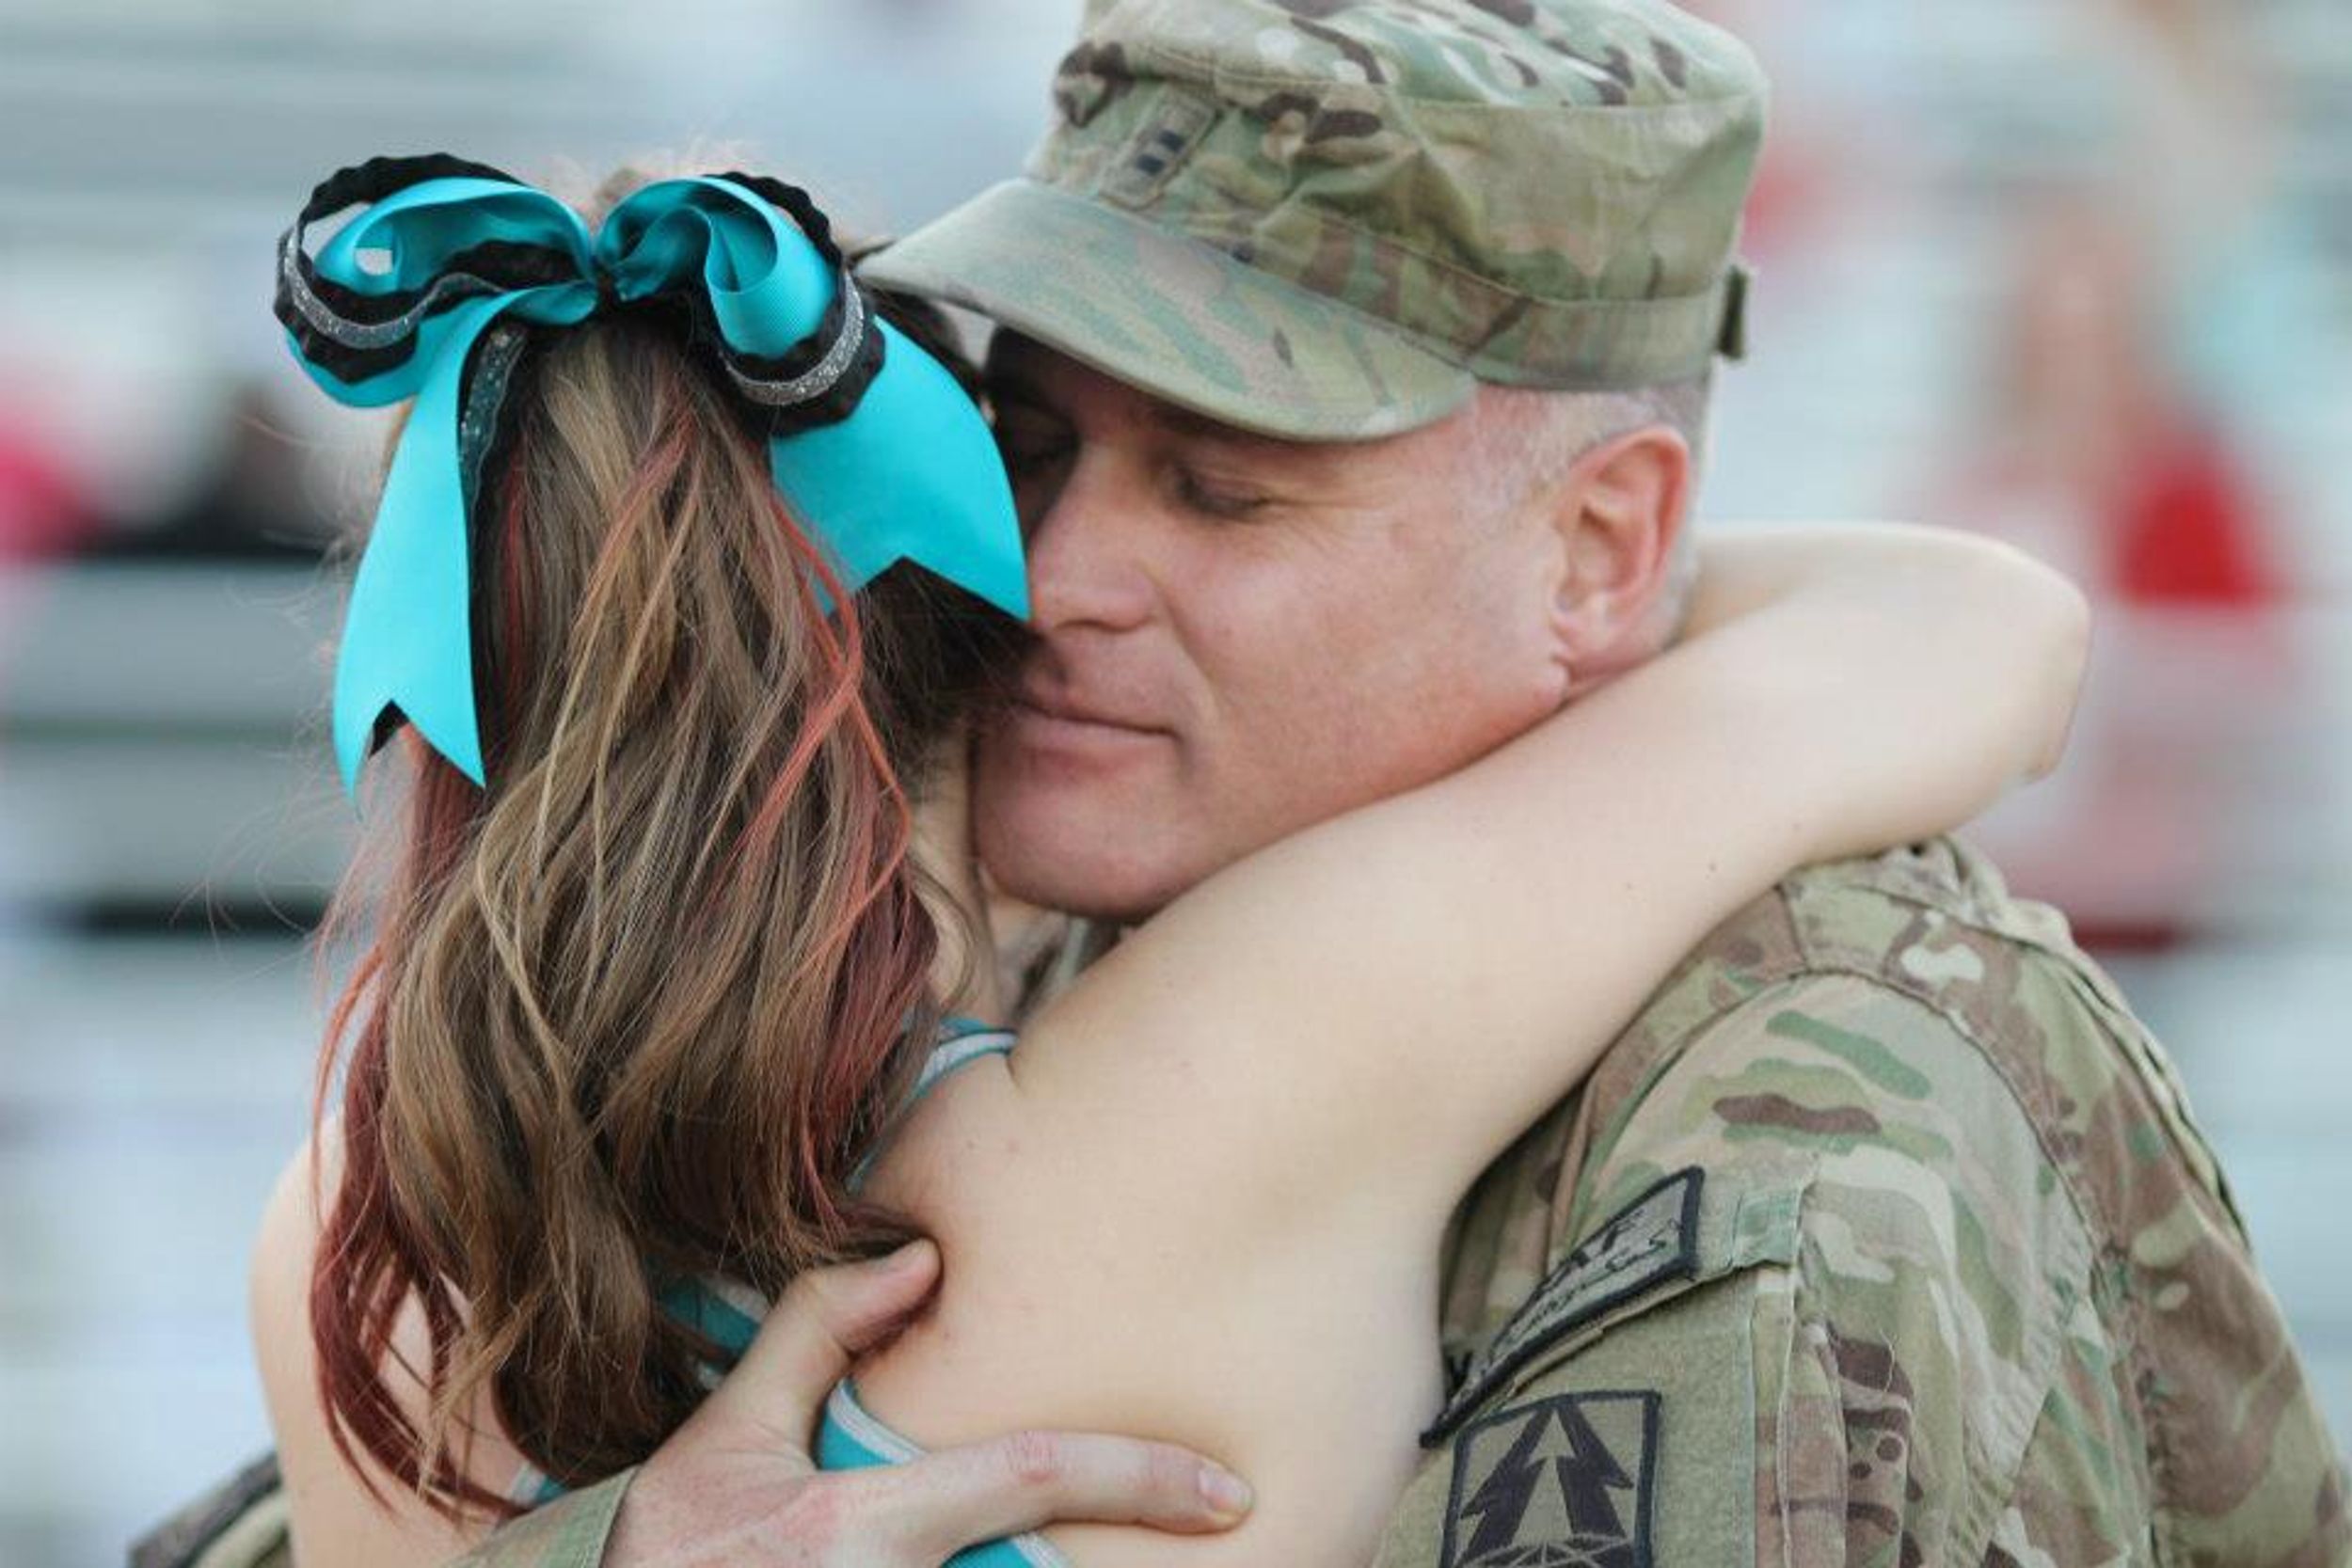 Being A Military Child: A Story Told Through Gifs